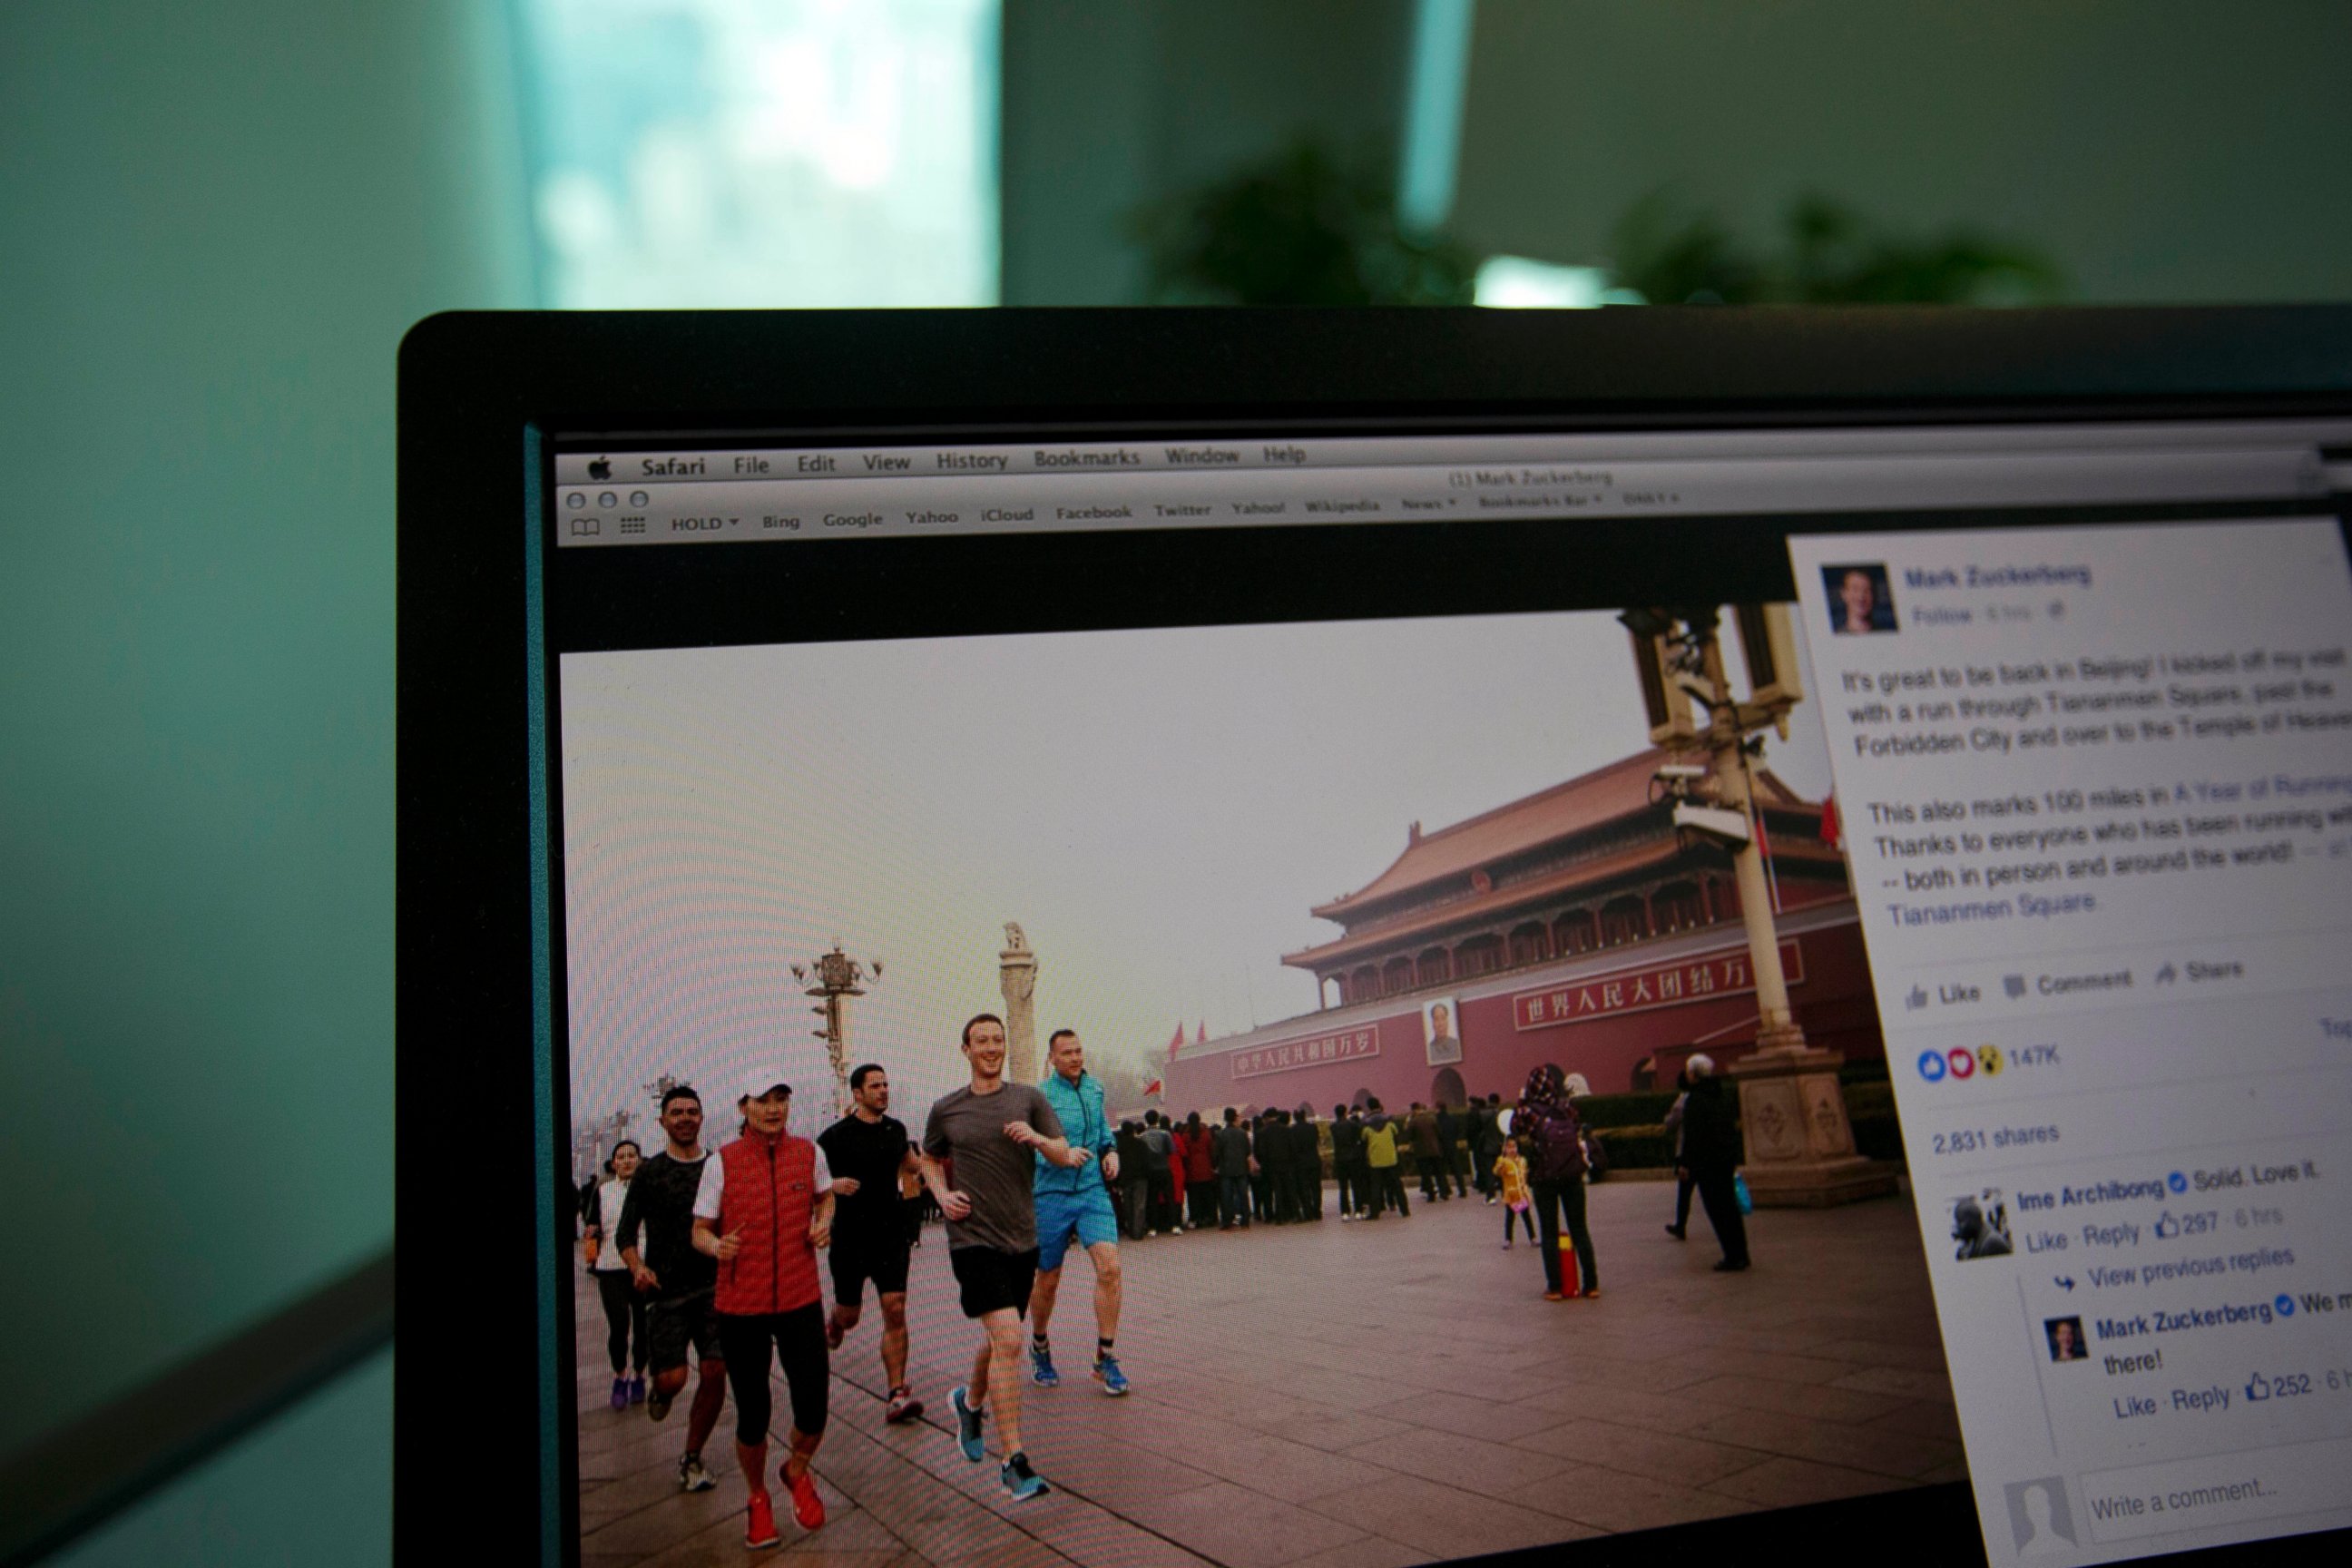 PHOTO: A computer screen displays the social media posting by Mark Zuckerberg on Facebook in Beijing, China, March 18, 2016.